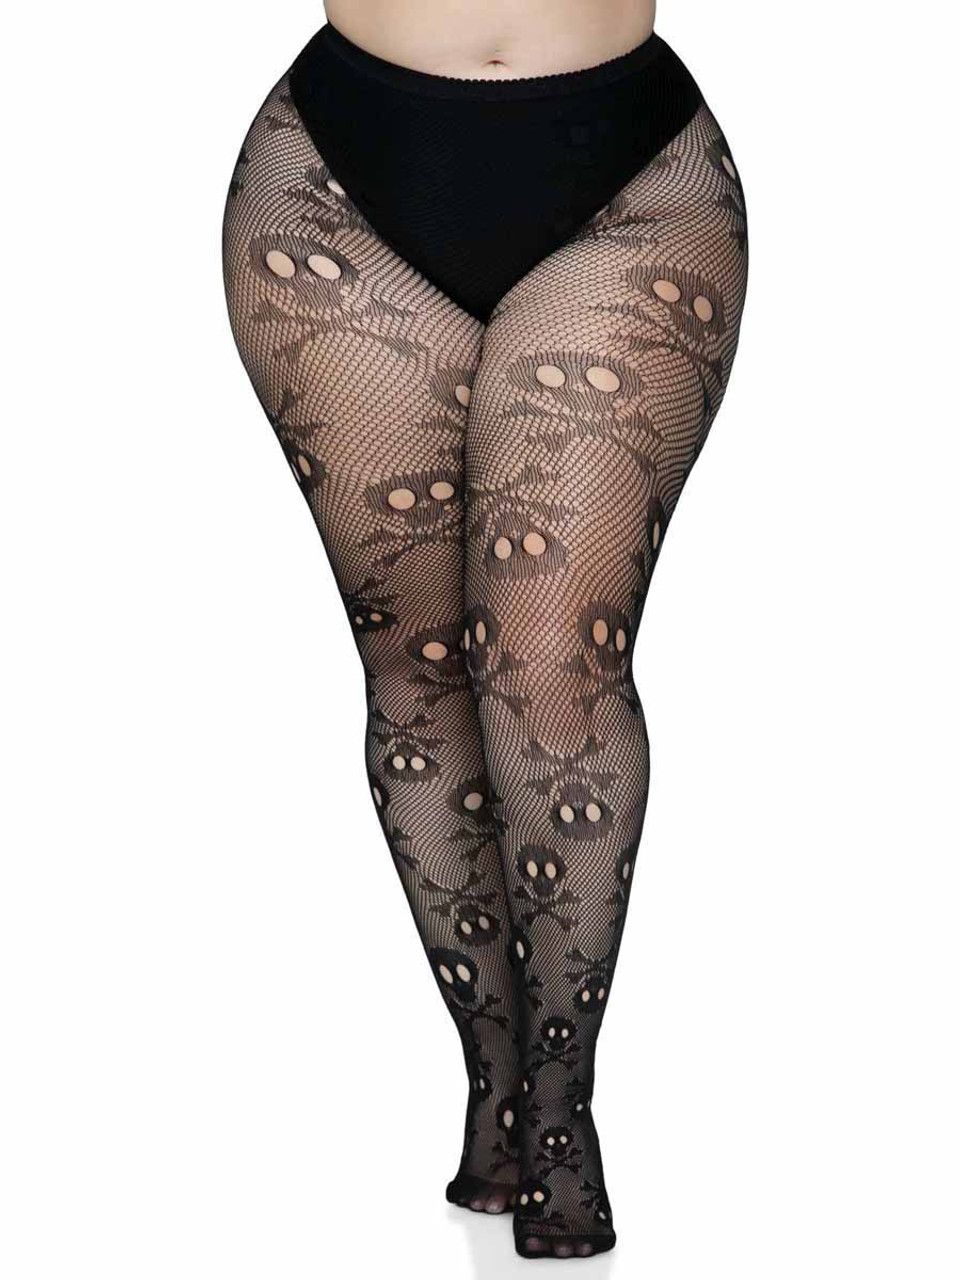 Women's Fishnet Crotchless Tights by Leg Avenue, Black - Inked Shop